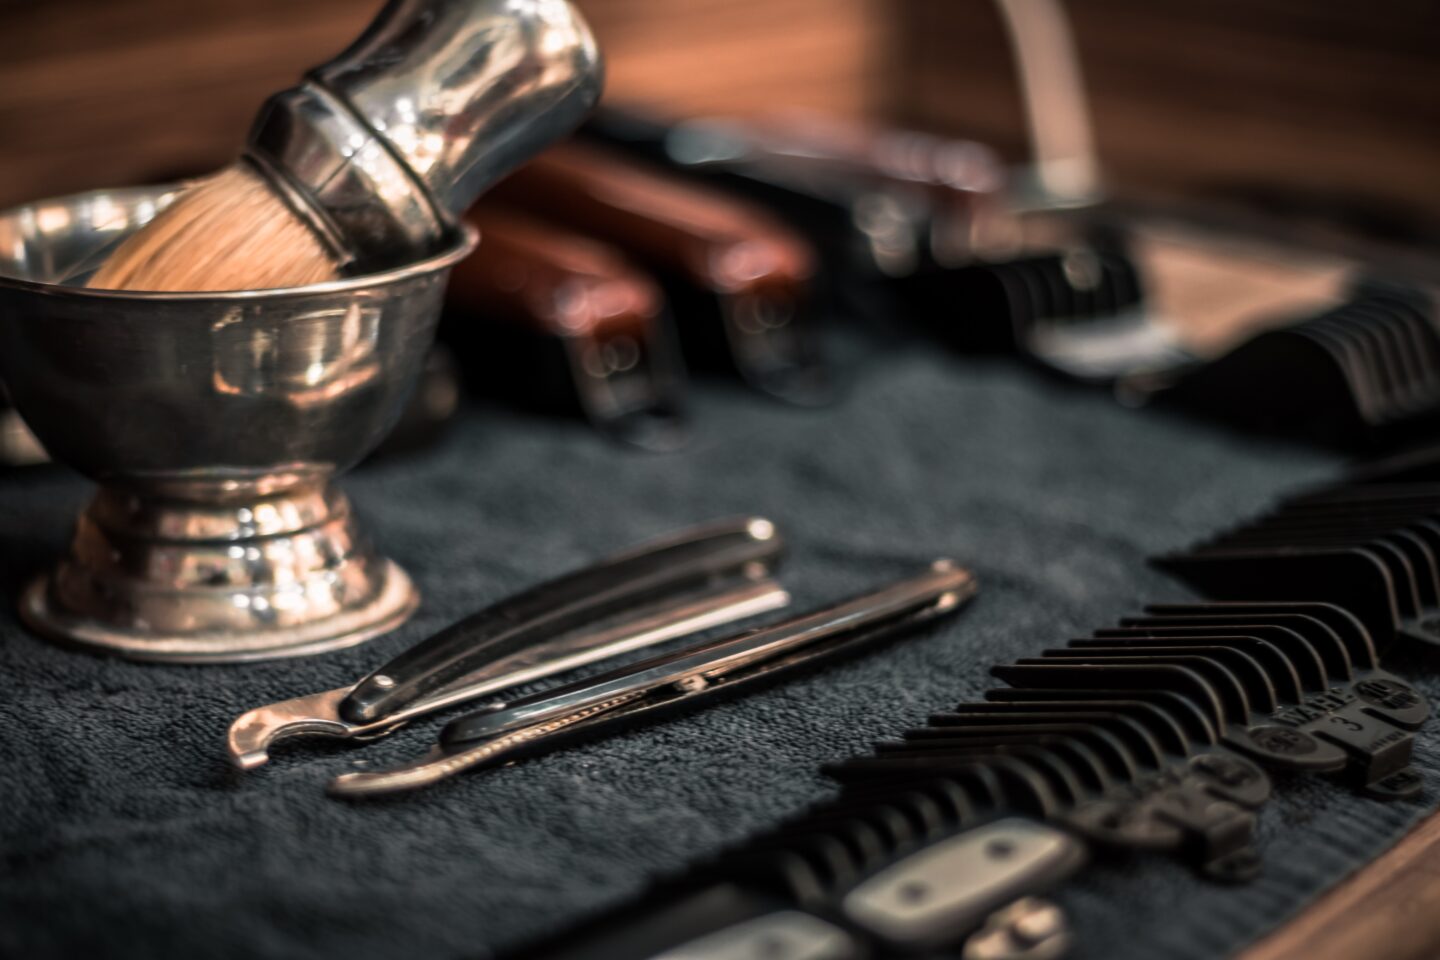 Men's Sustainable Grooming Products For Your Wedding Day